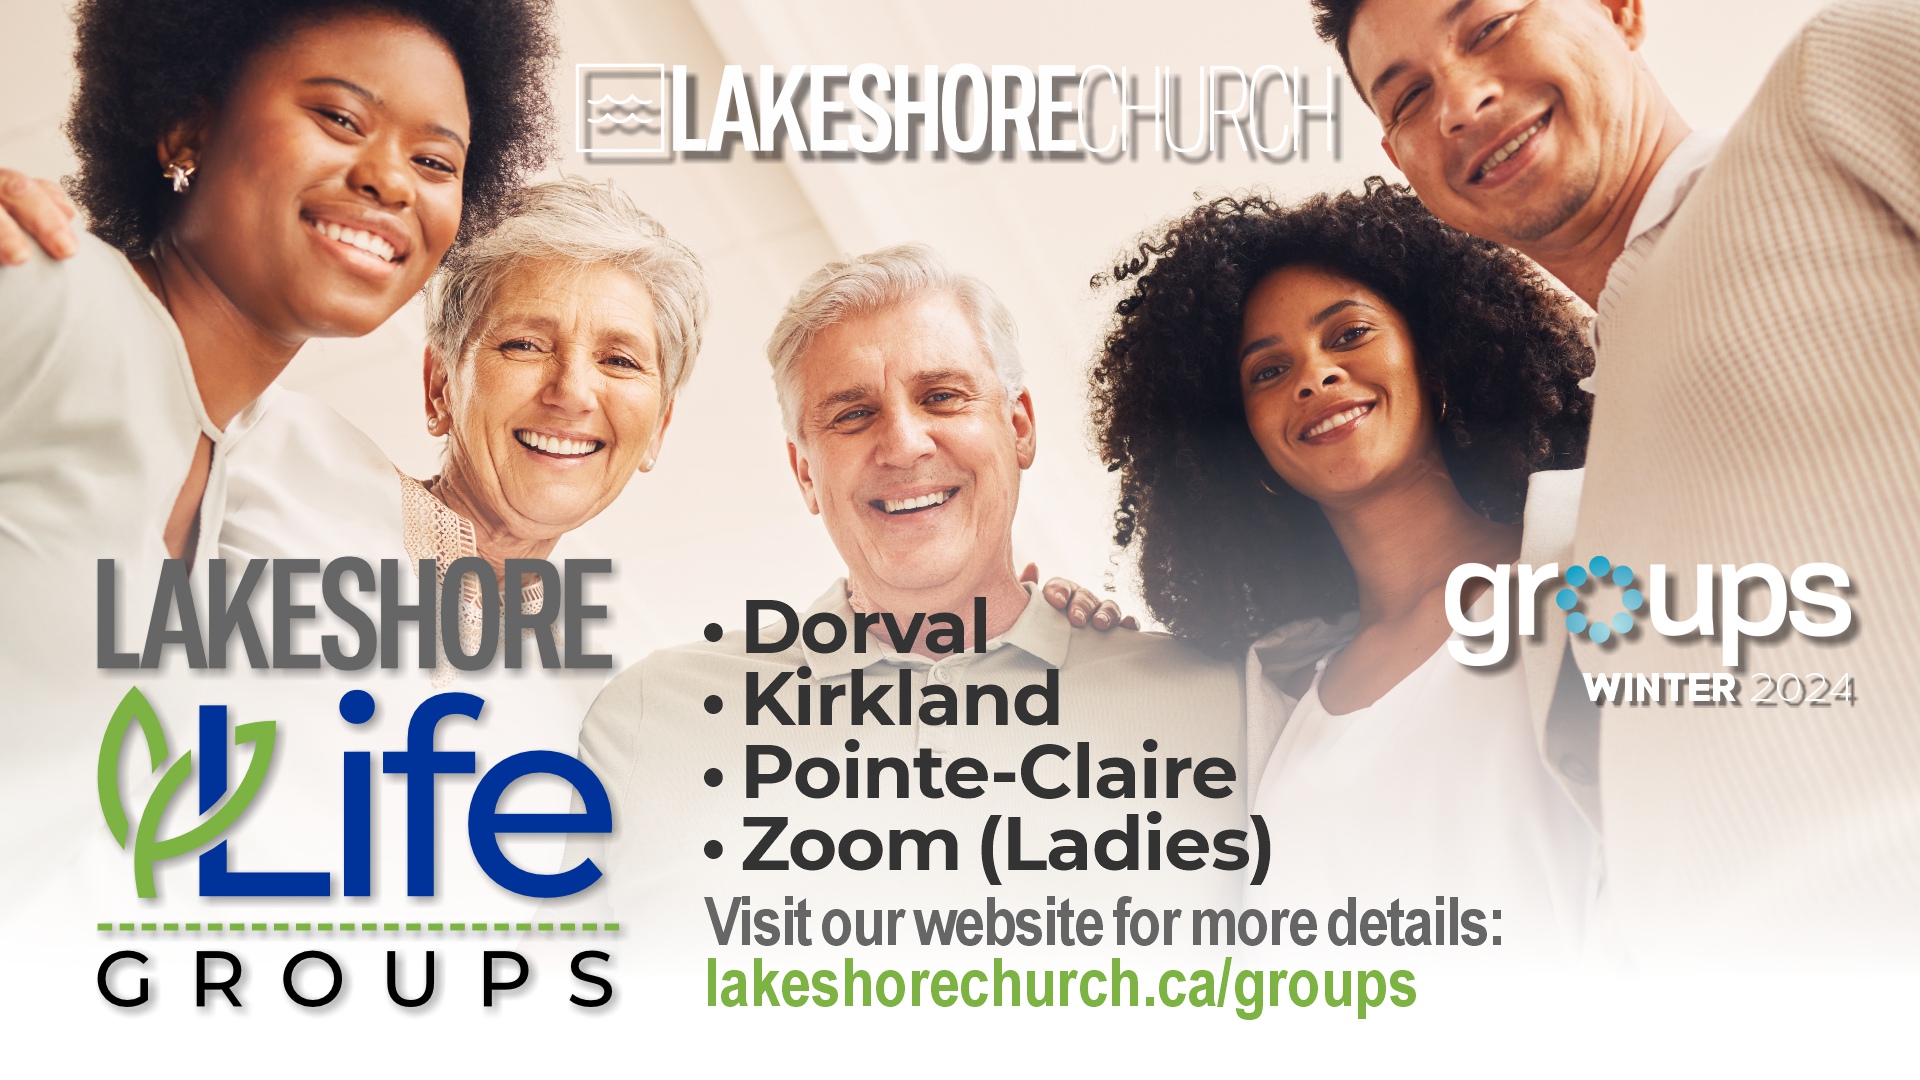 Featured image for “Lakeshore Life Groups – Winter 2024”